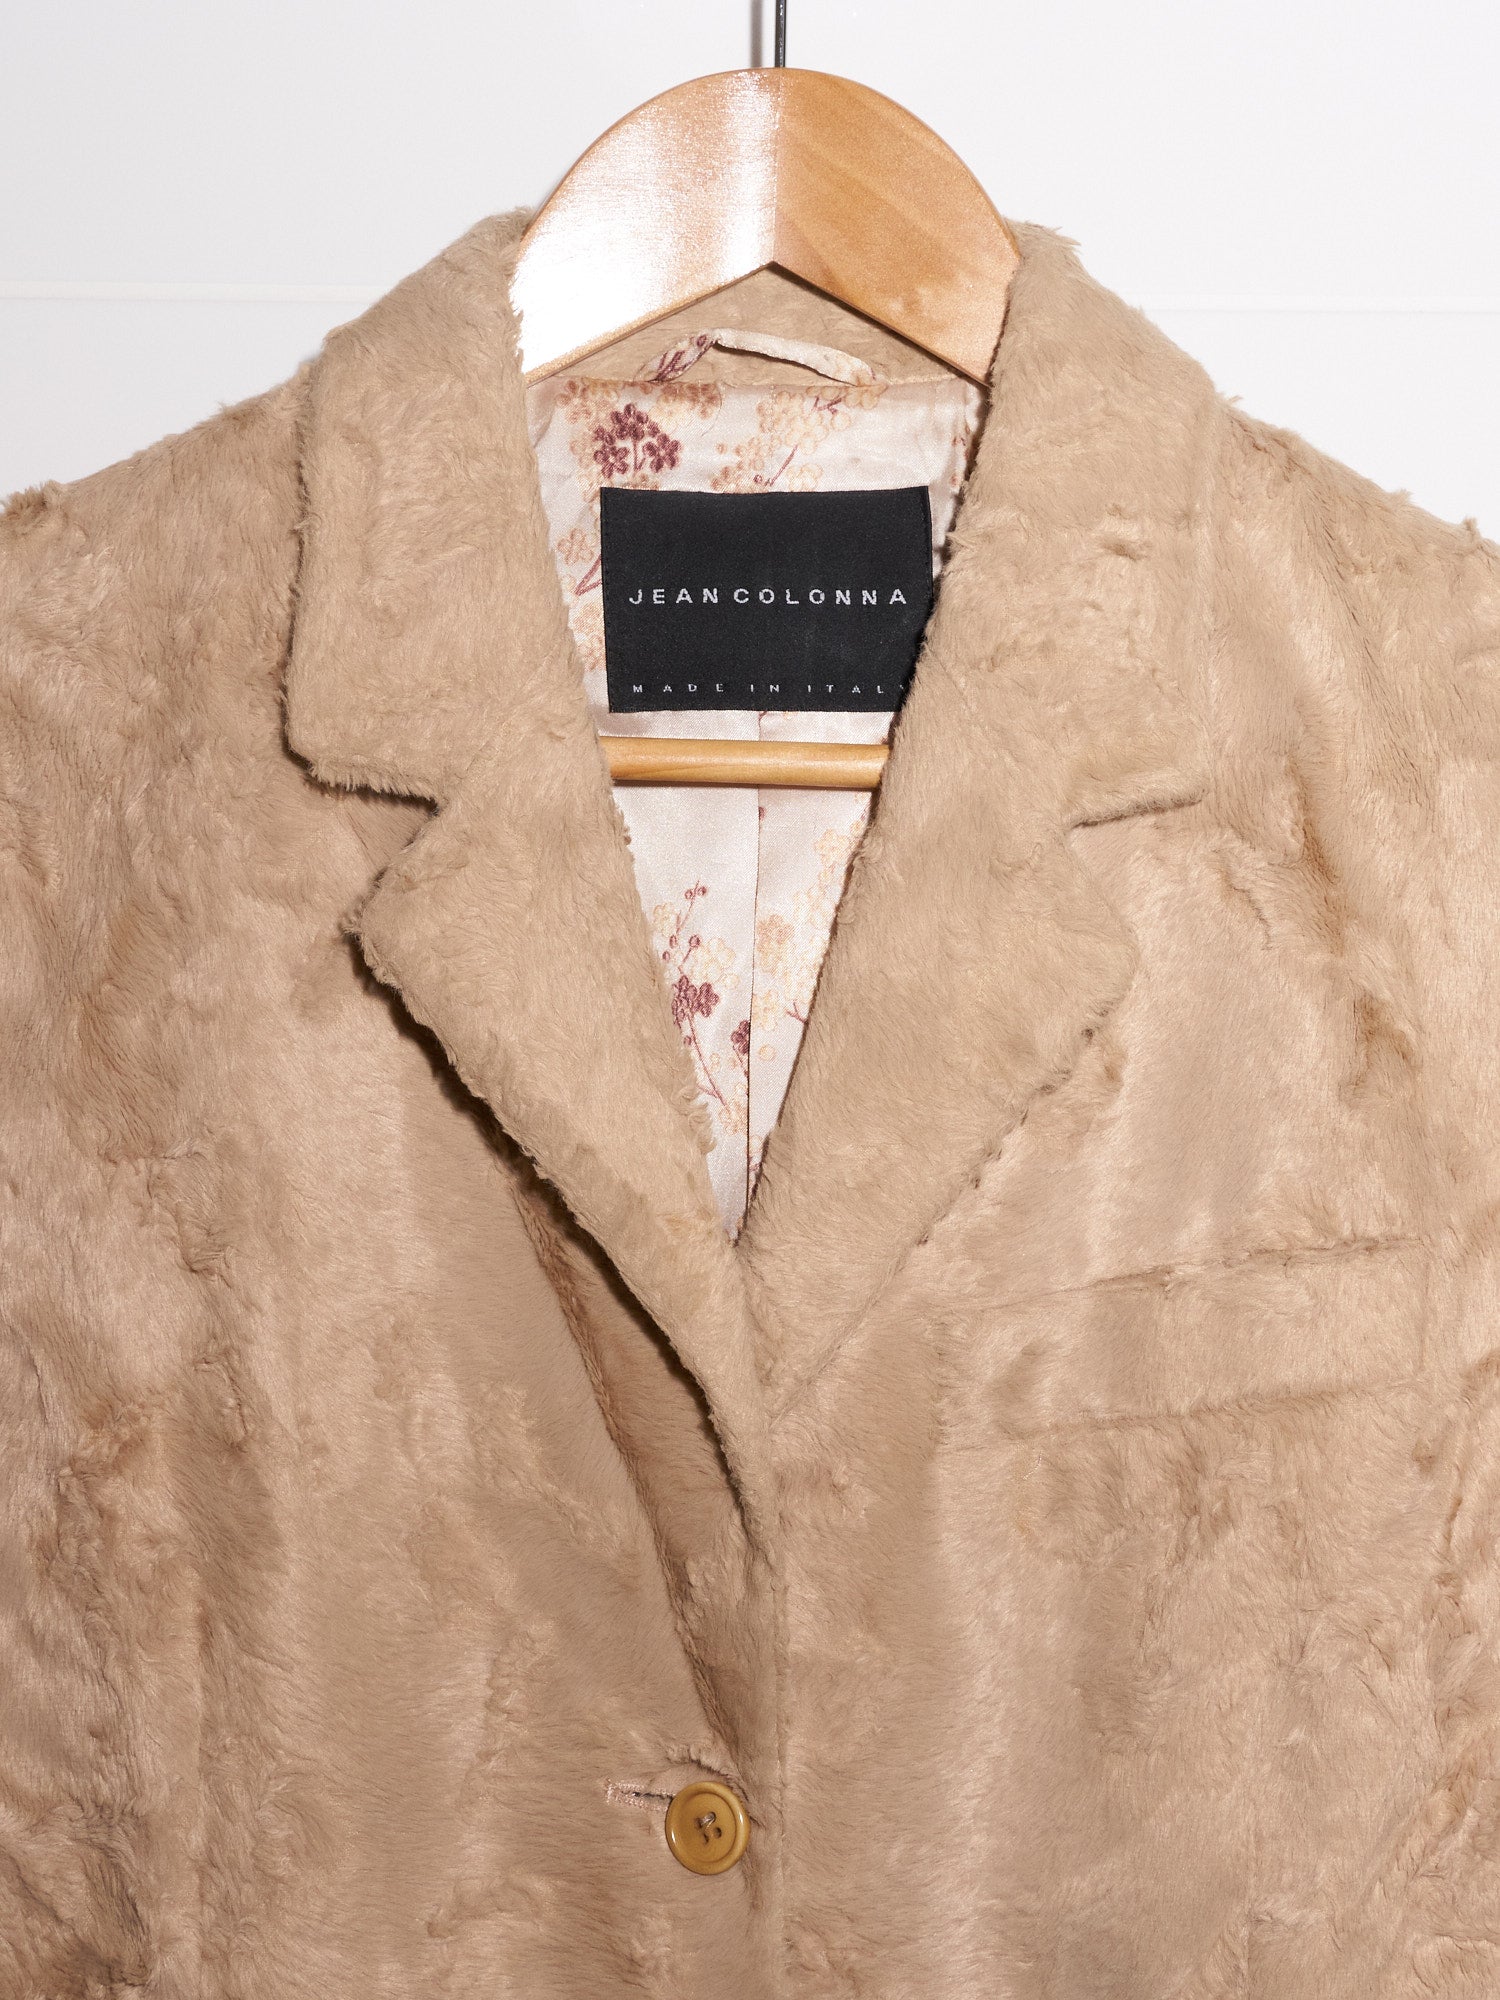 Jean Colonna AW1998 beige faux fur coat with floral print lining - sz 40